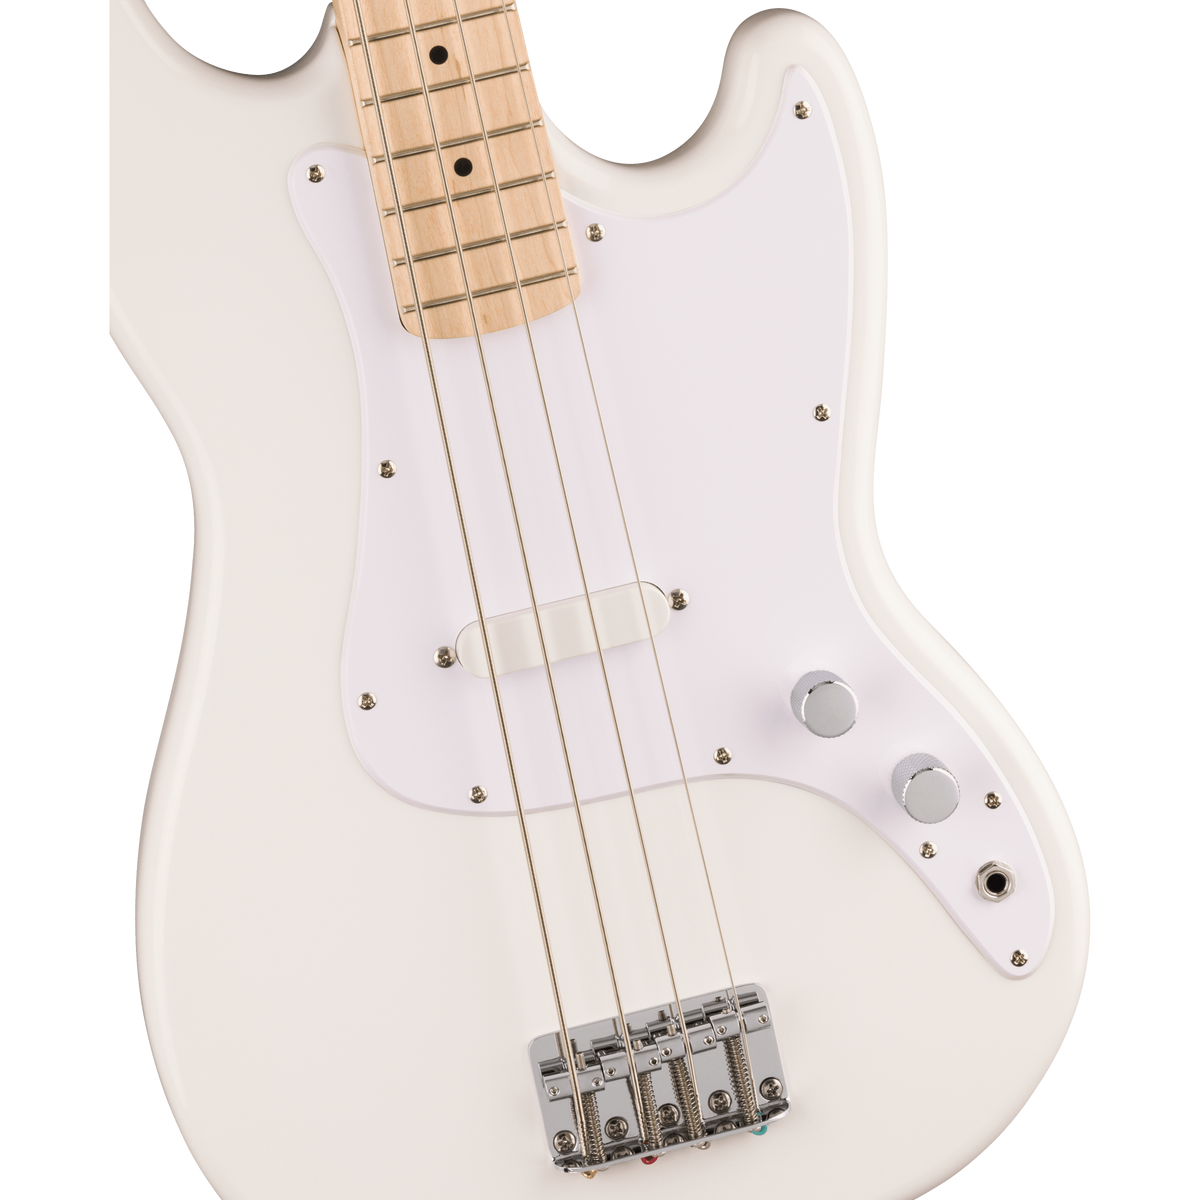 The Fender Squier Sonic Bronco Electric Bass is ready to launch any musical adventure into warp speed, offering iconic Fender style and inspiring tone for players at any stage